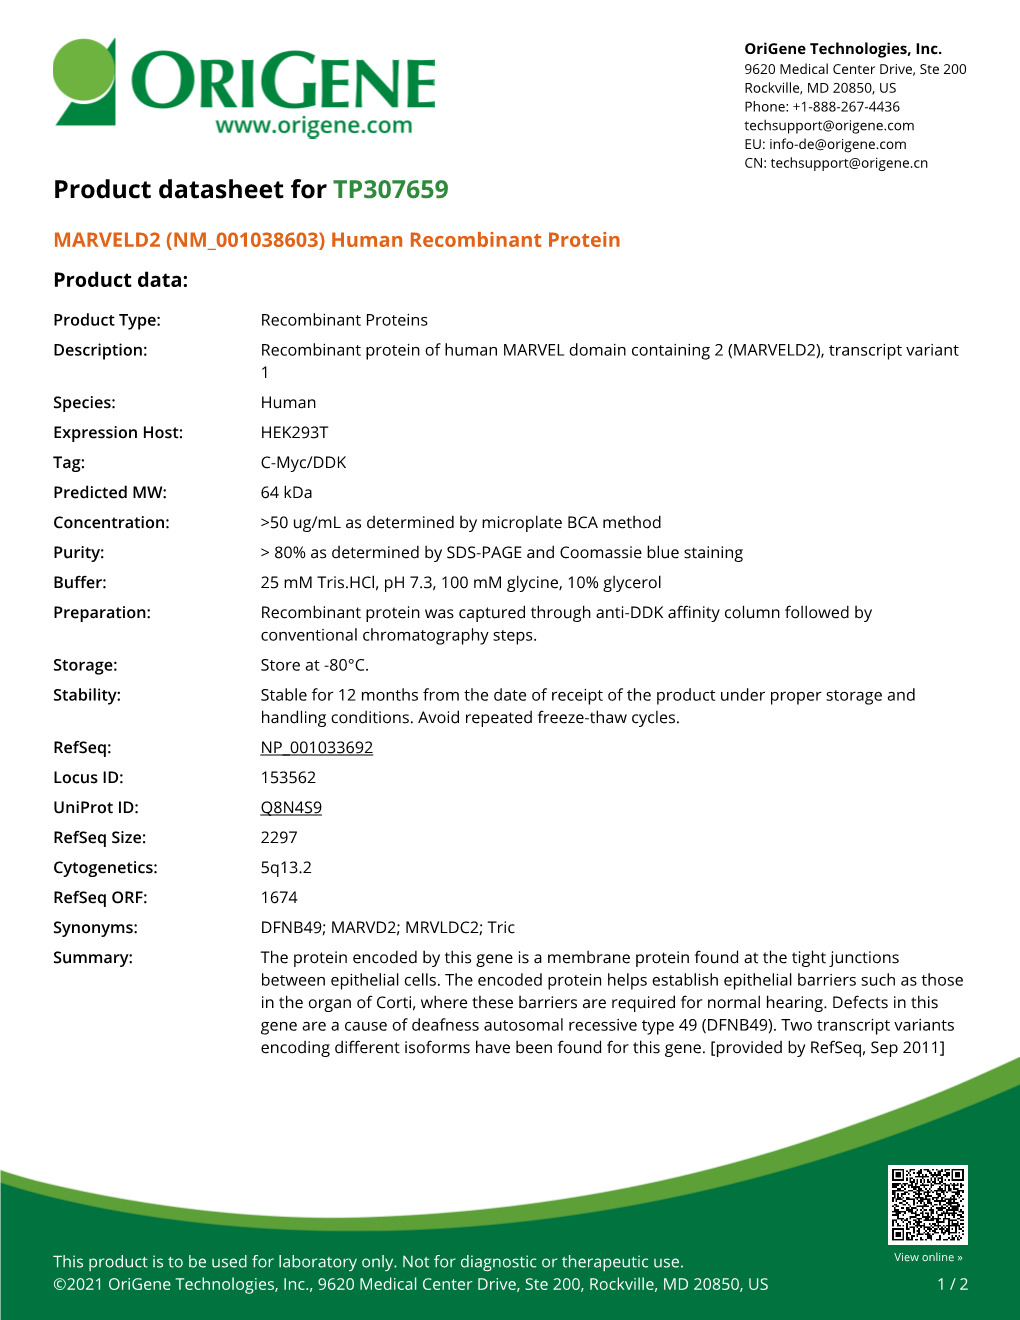 MARVELD2 (NM 001038603) Human Recombinant Protein Product Data